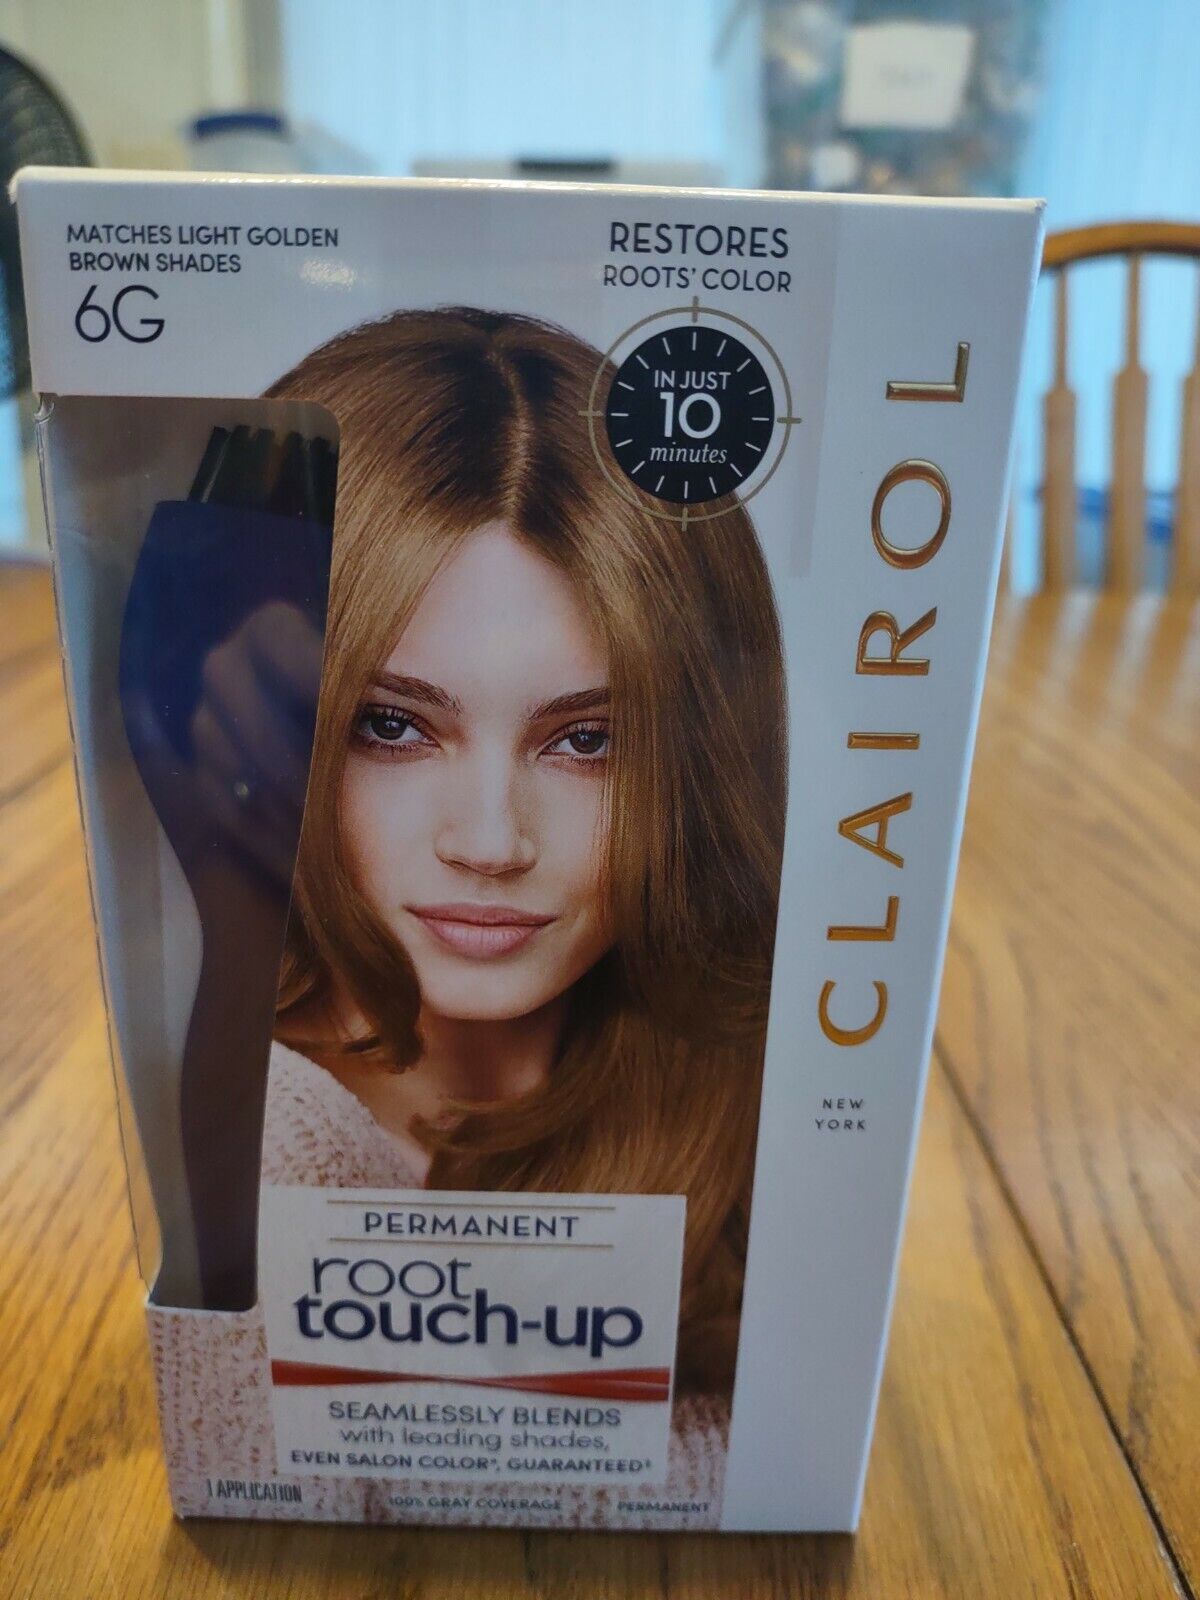 Clairol Permanent Root Touch Up 6G Matches Light Golden Brown Shades